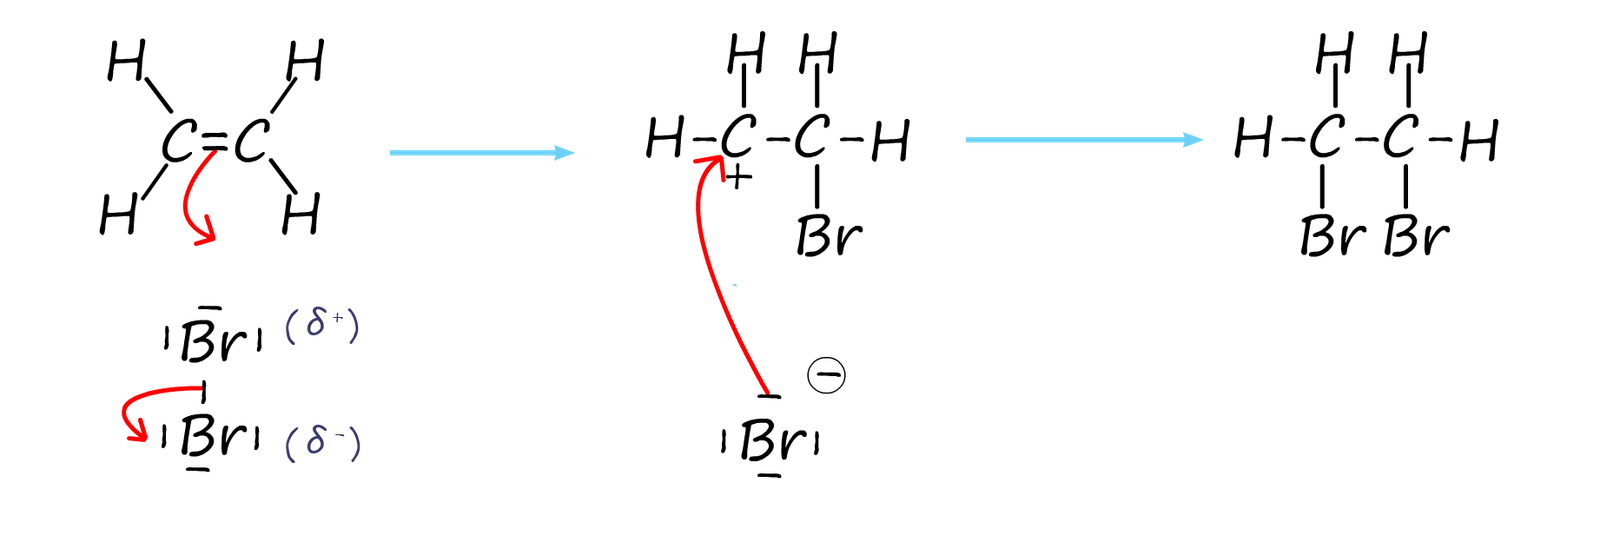 mechanism of electrophilic addition of bromine